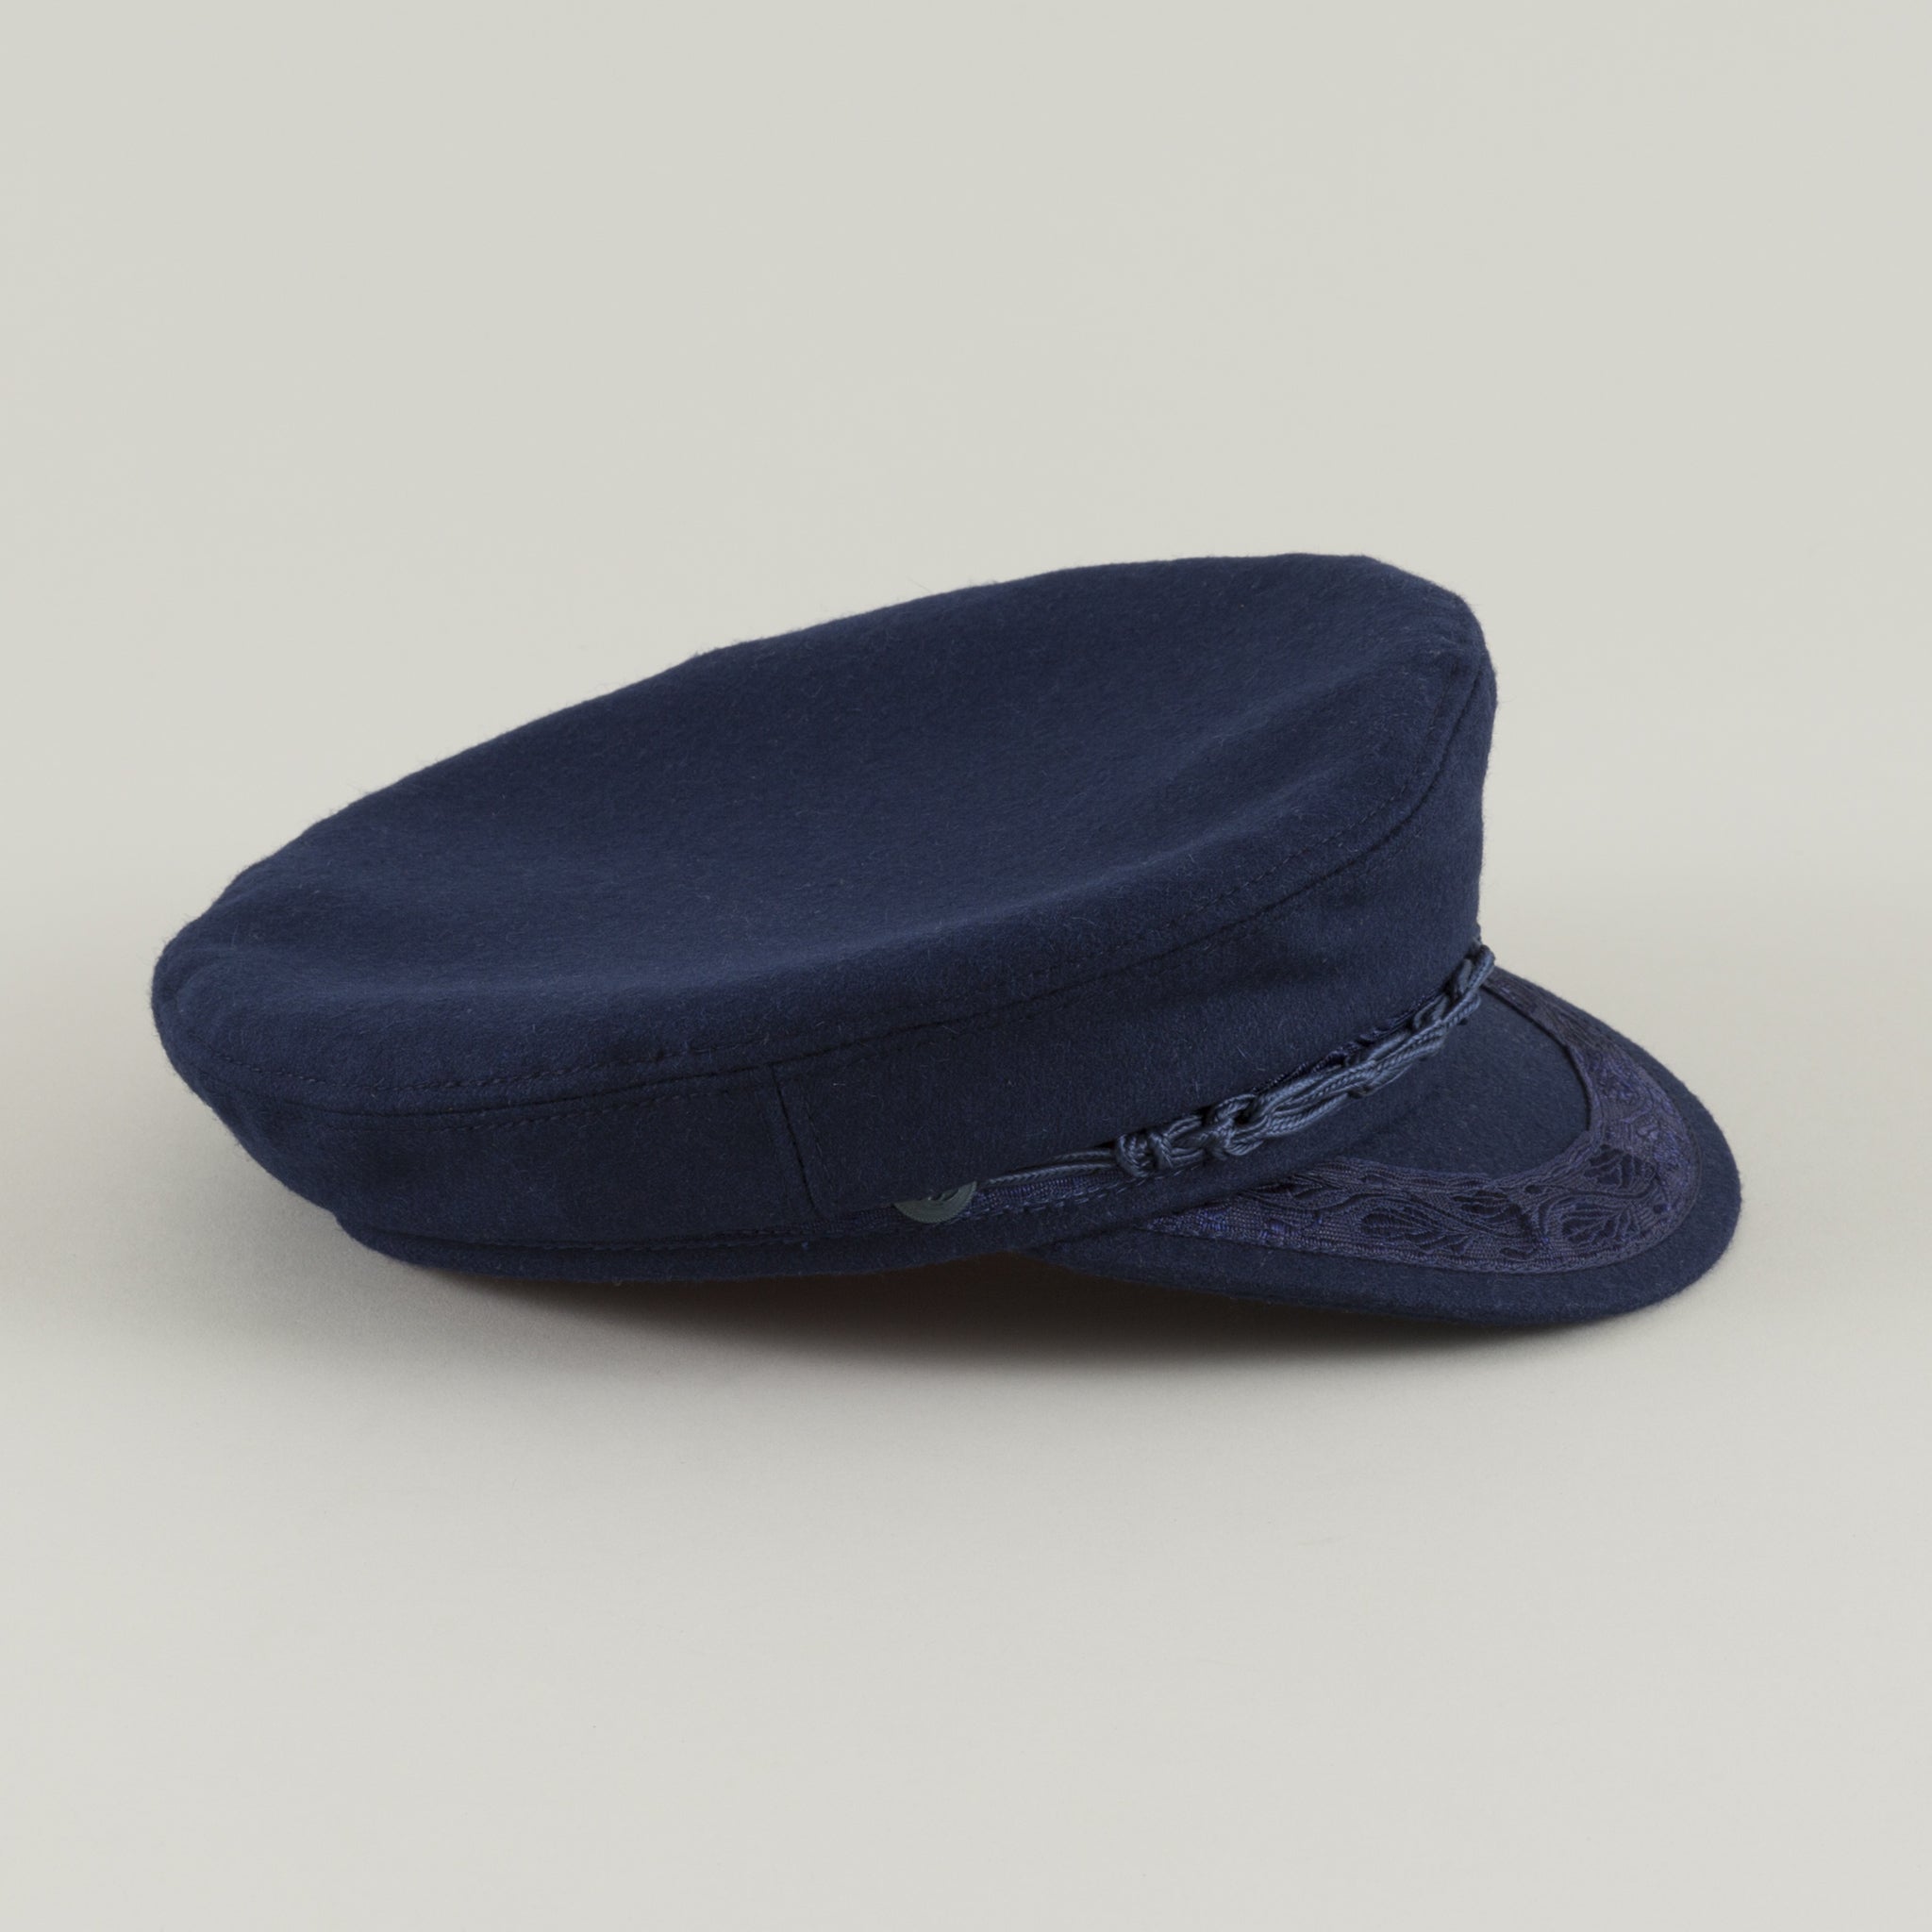 Greek Fisherman's Cap, Blue - The Stronghold